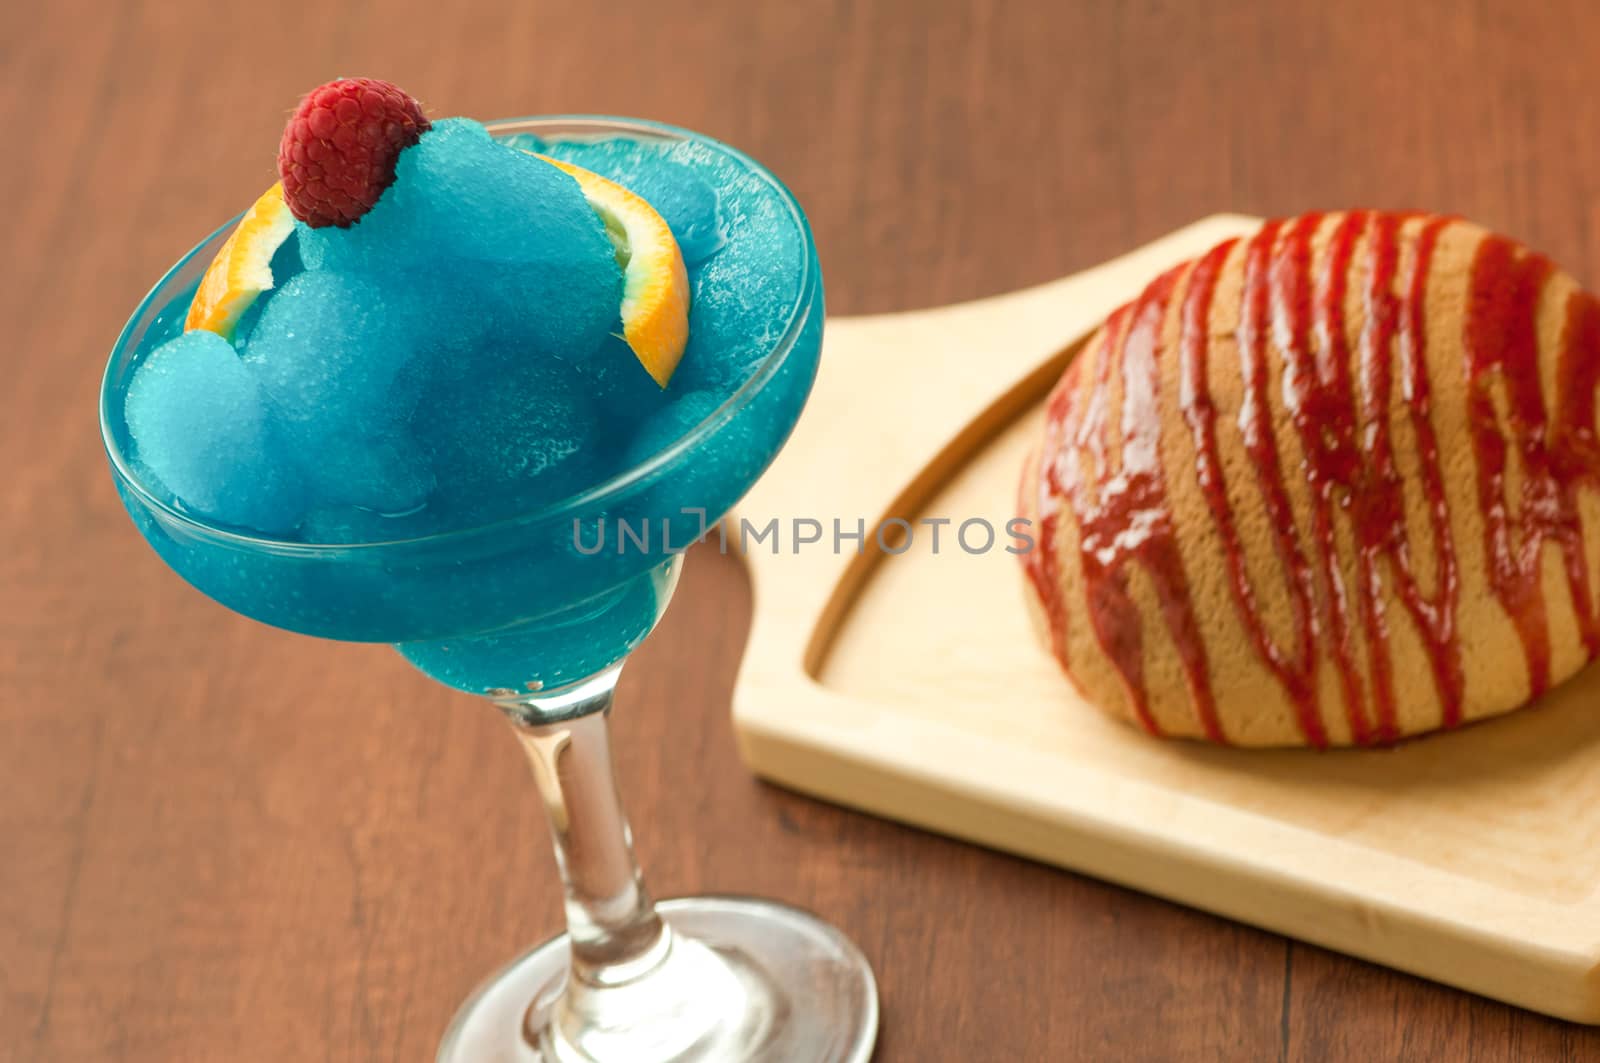 bread on a wooden plate and a glass of ice-cream with raspberry and lemon